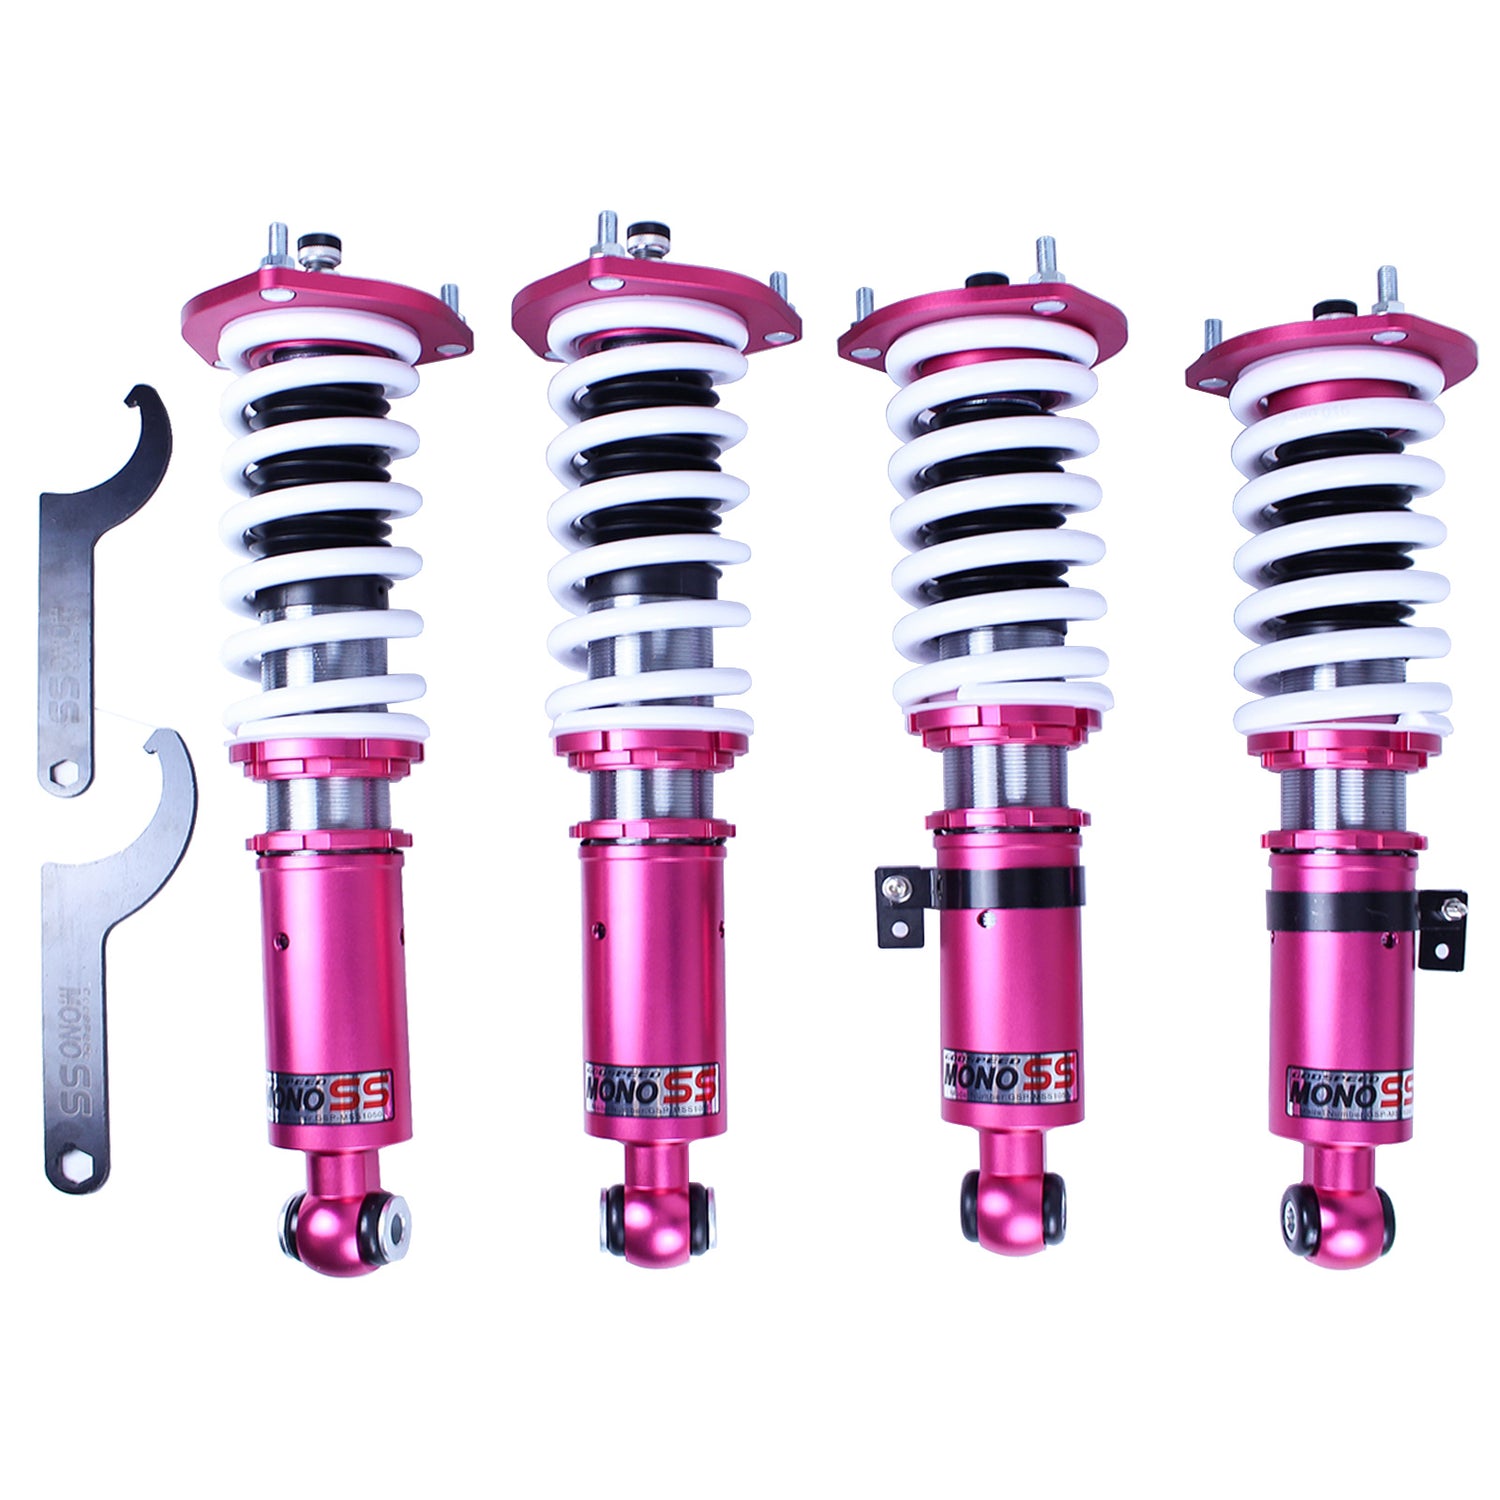 Godspeed MSS1050-B MonoSS Coilover Lowering Kit, Fully Adjustable, Ride Height, Spring Tension And 16 Click Damping, Toyota Cressida(JZX90/JZX100) 1992-01